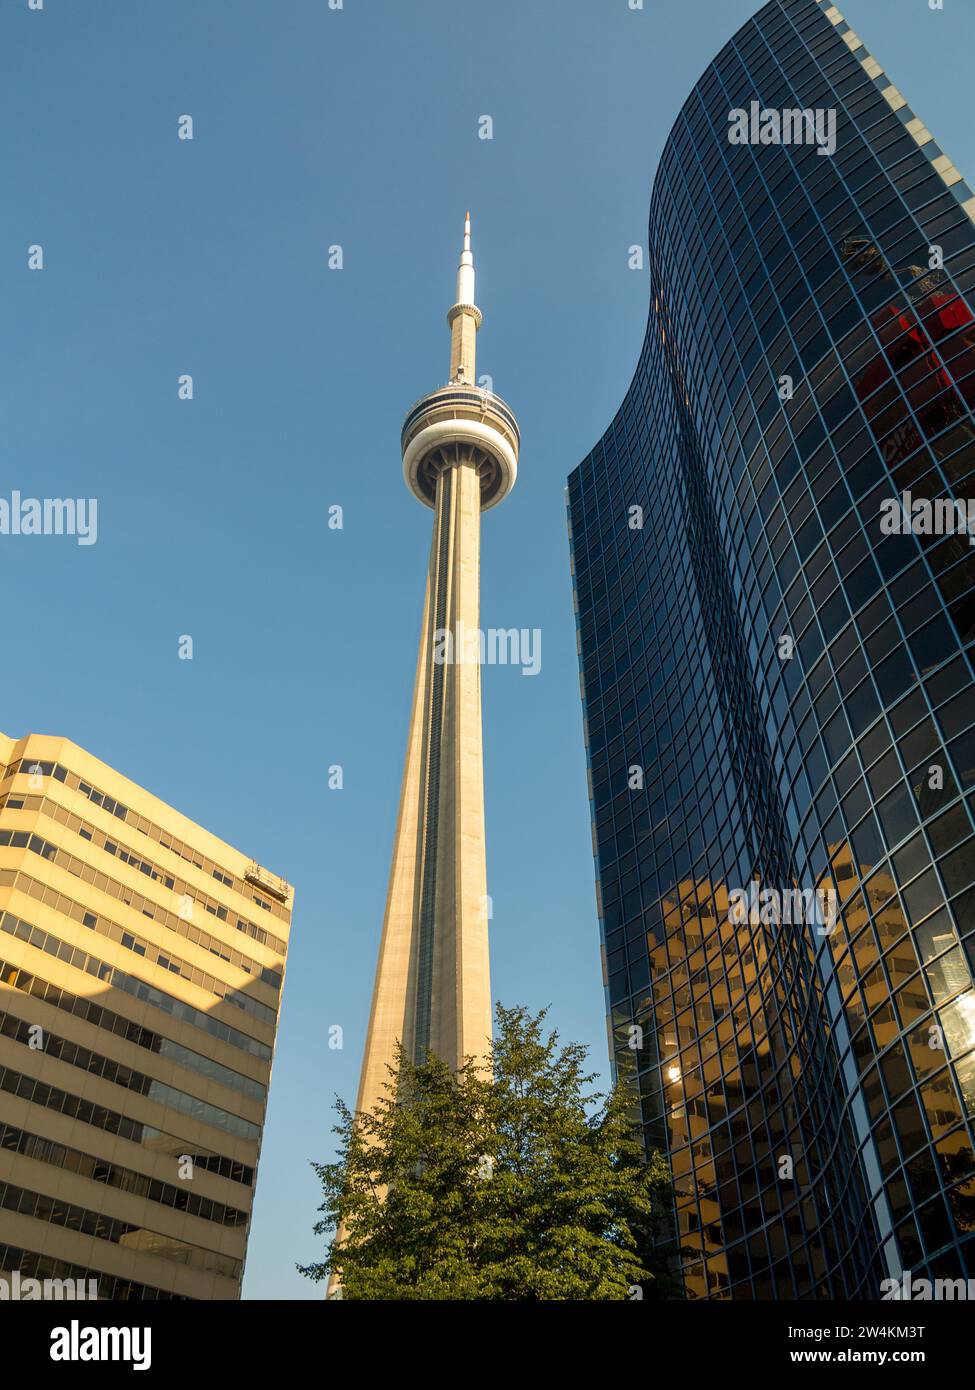 CN Tower. 290 Bremner Blvd, Toronto, ON M5V 3L9. Iconic tower over 553 meters high, with glass floor, revolving restaurant and panoramic view. Stock Photo